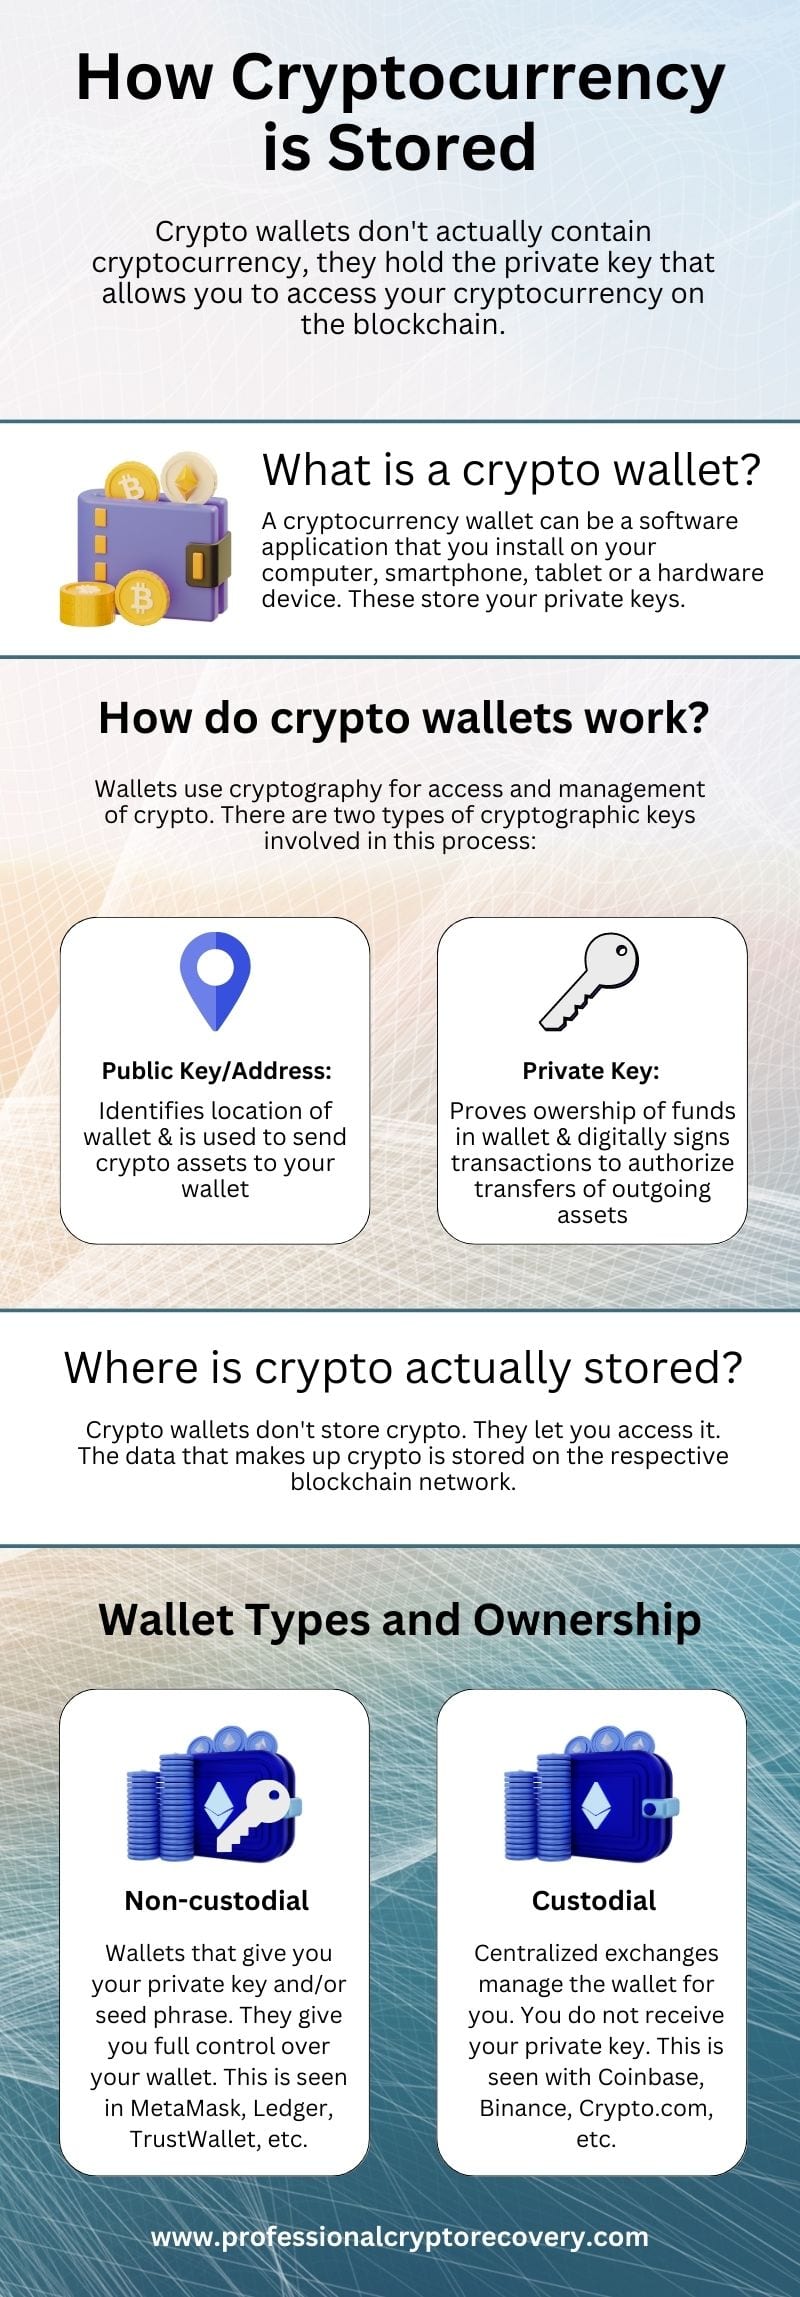 How is cryptocurrency stored